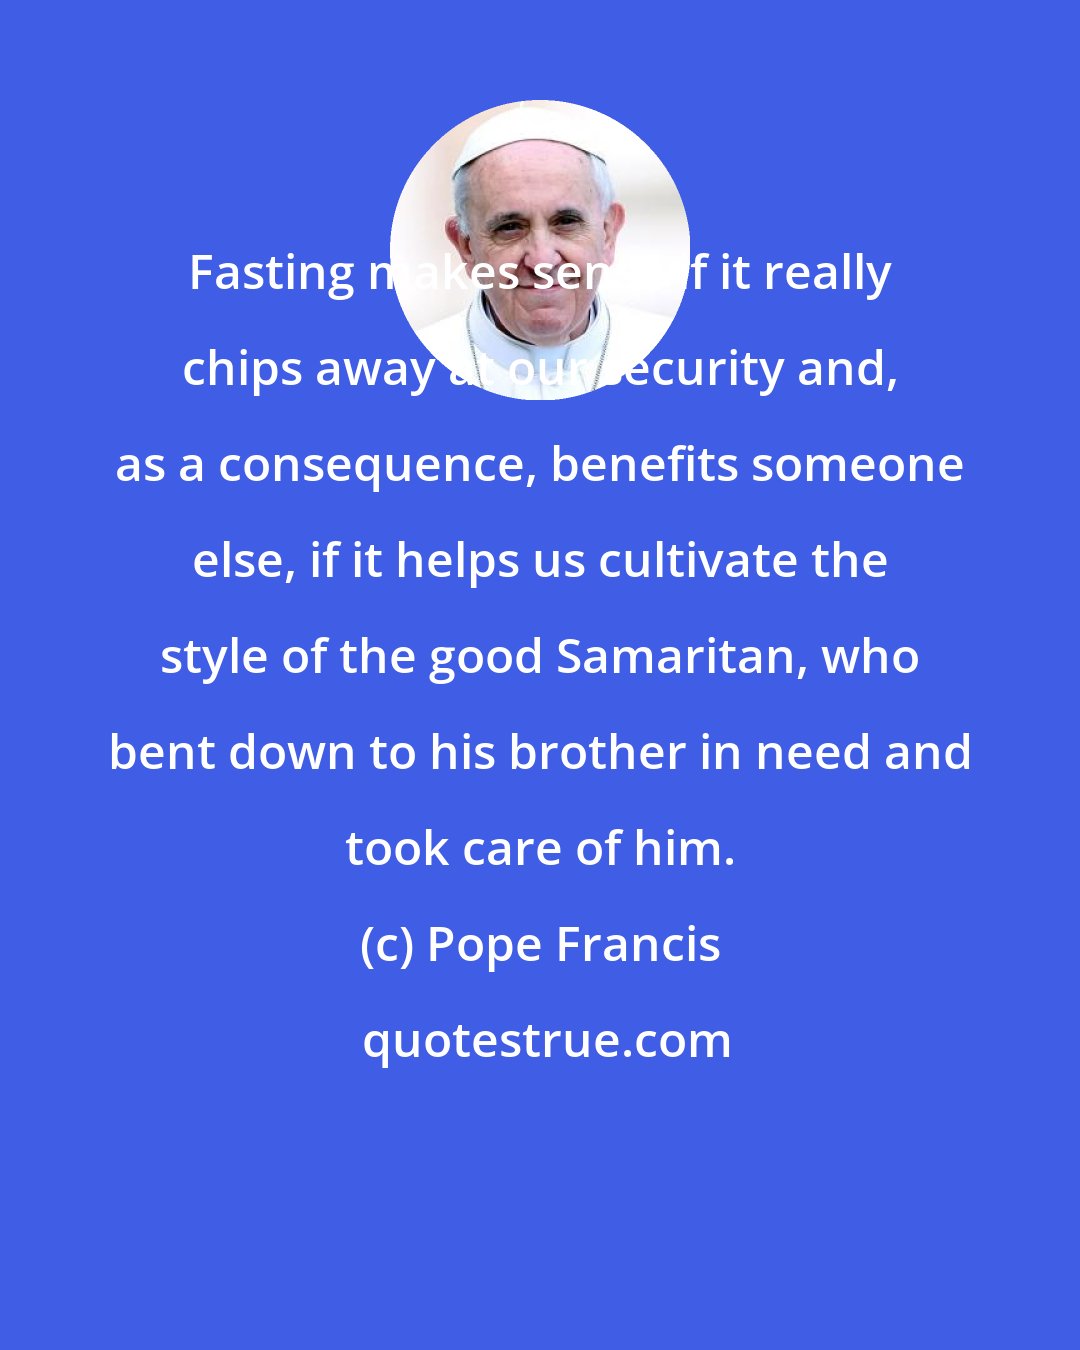 Pope Francis: Fasting makes sense if it really chips away at our security and, as a consequence, benefits someone else, if it helps us cultivate the style of the good Samaritan, who bent down to his brother in need and took care of him.